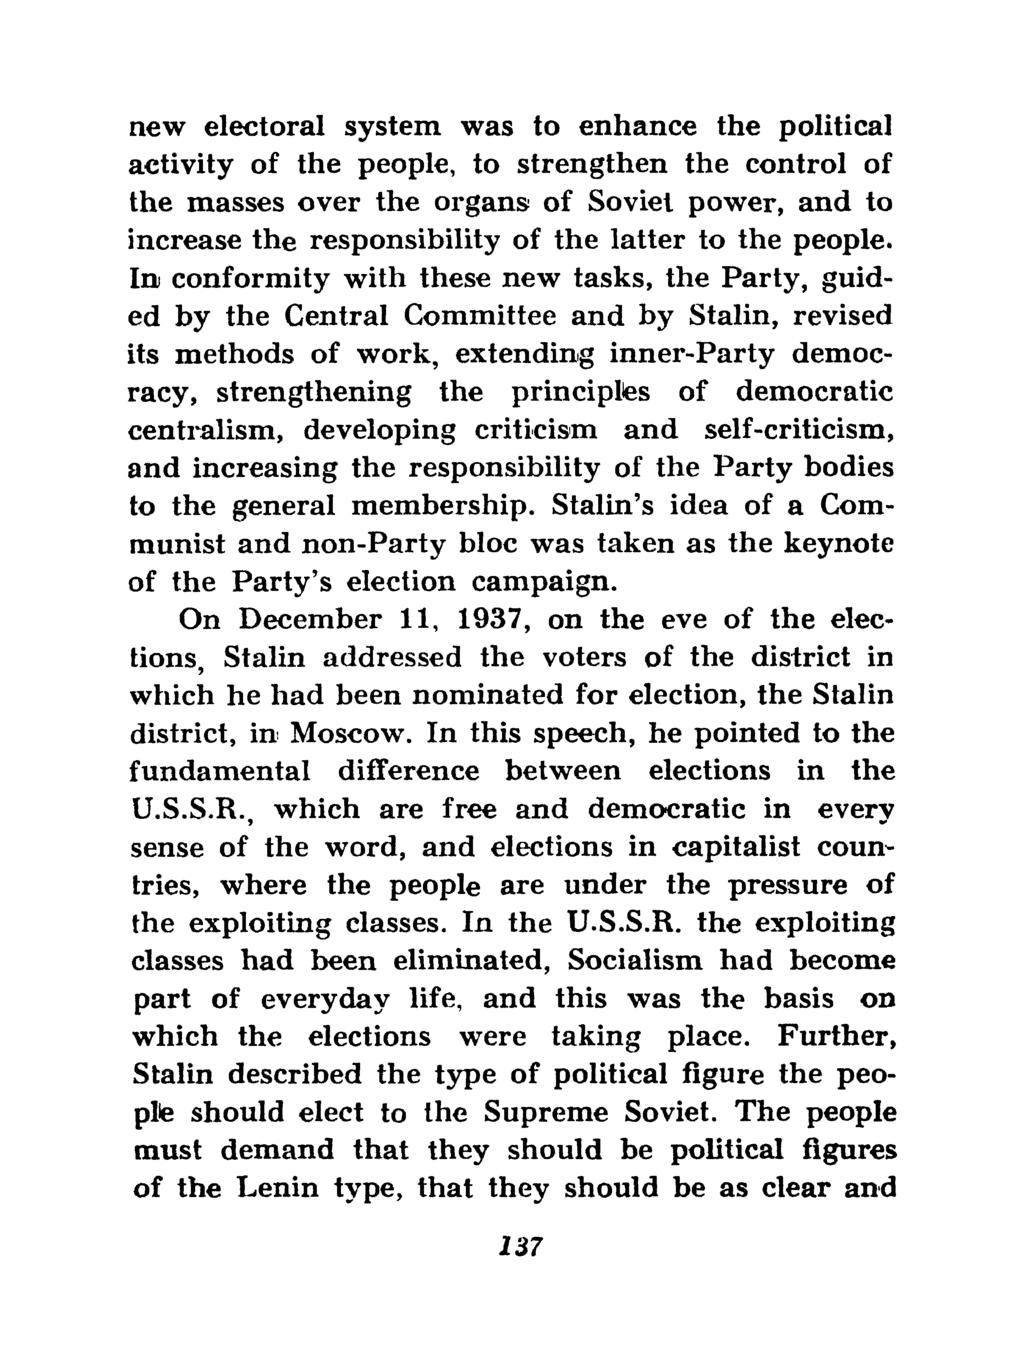 new electoral system was to enhance the political activity of the people, to strengthen the control of the masses over the organs of Soviet power, and to increase the responsibility of the latter to